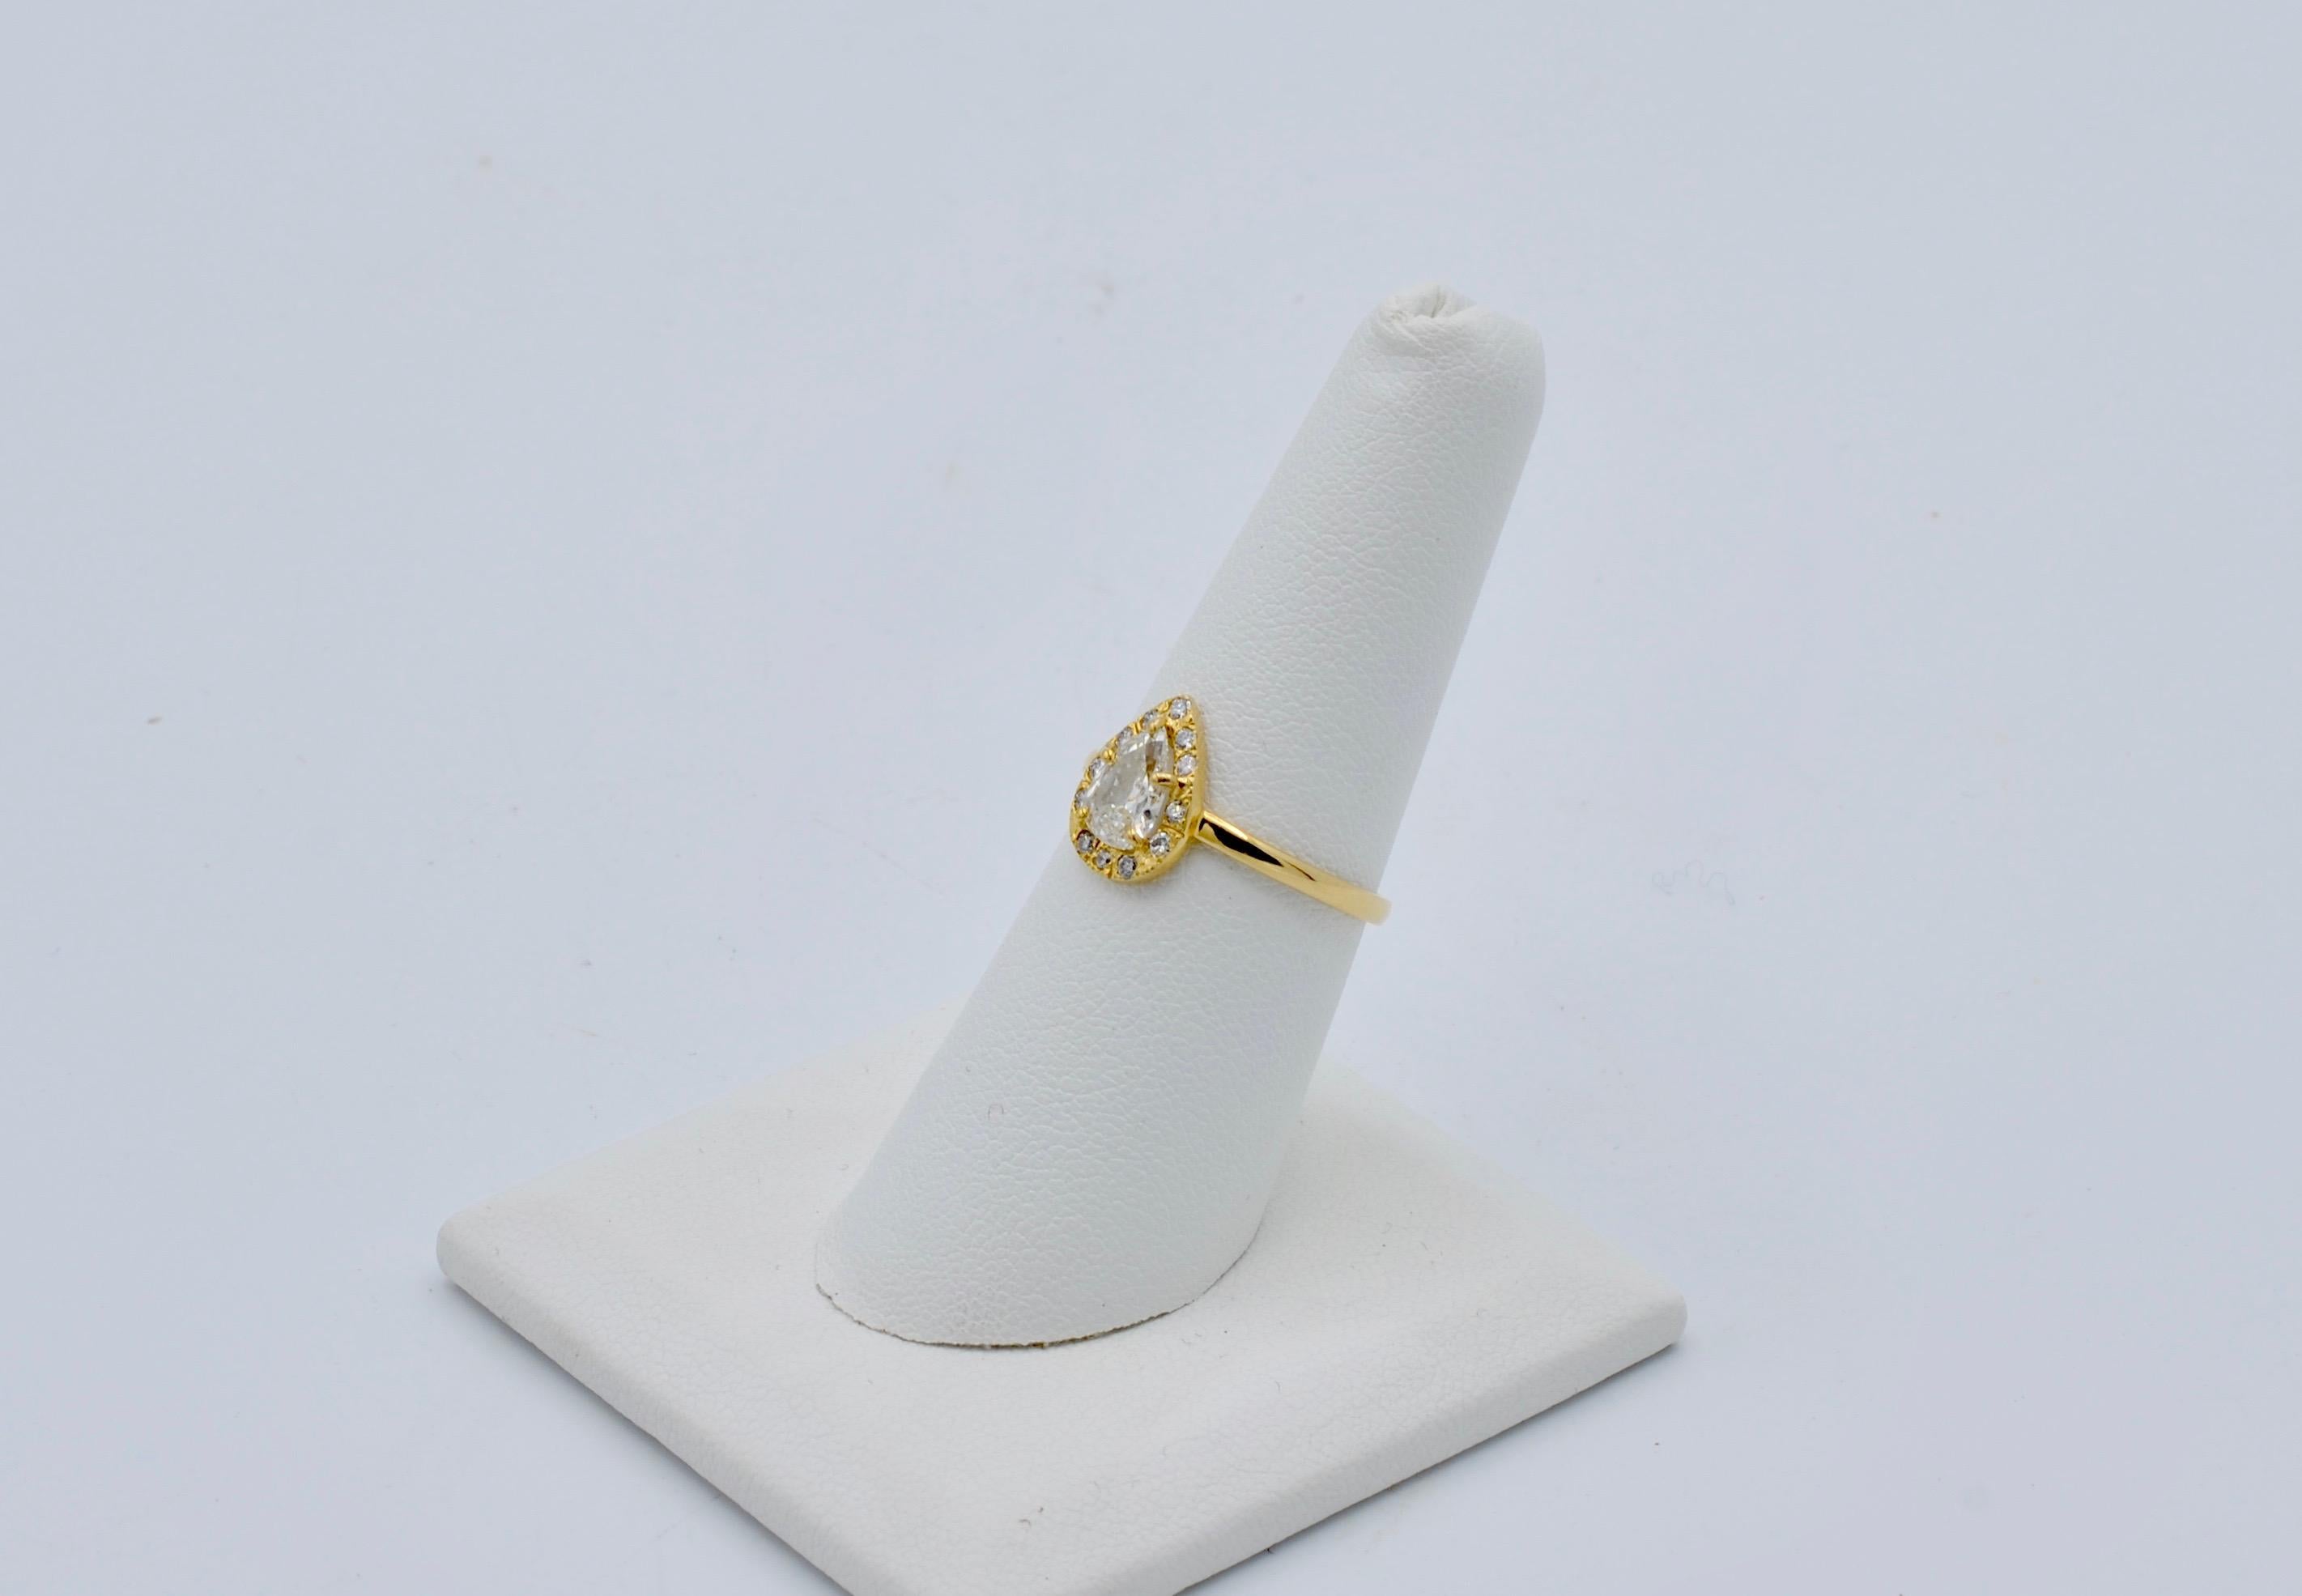 This beautiful 0.65 pear shaped diamond is set in 14k gold with a diamond halo is the perfect symmetry of balanced proportion. The center diamond is SI1 J/K color and is surrounde by 12 brilliant white diamonds measuring 0.18 tw carats. The ring